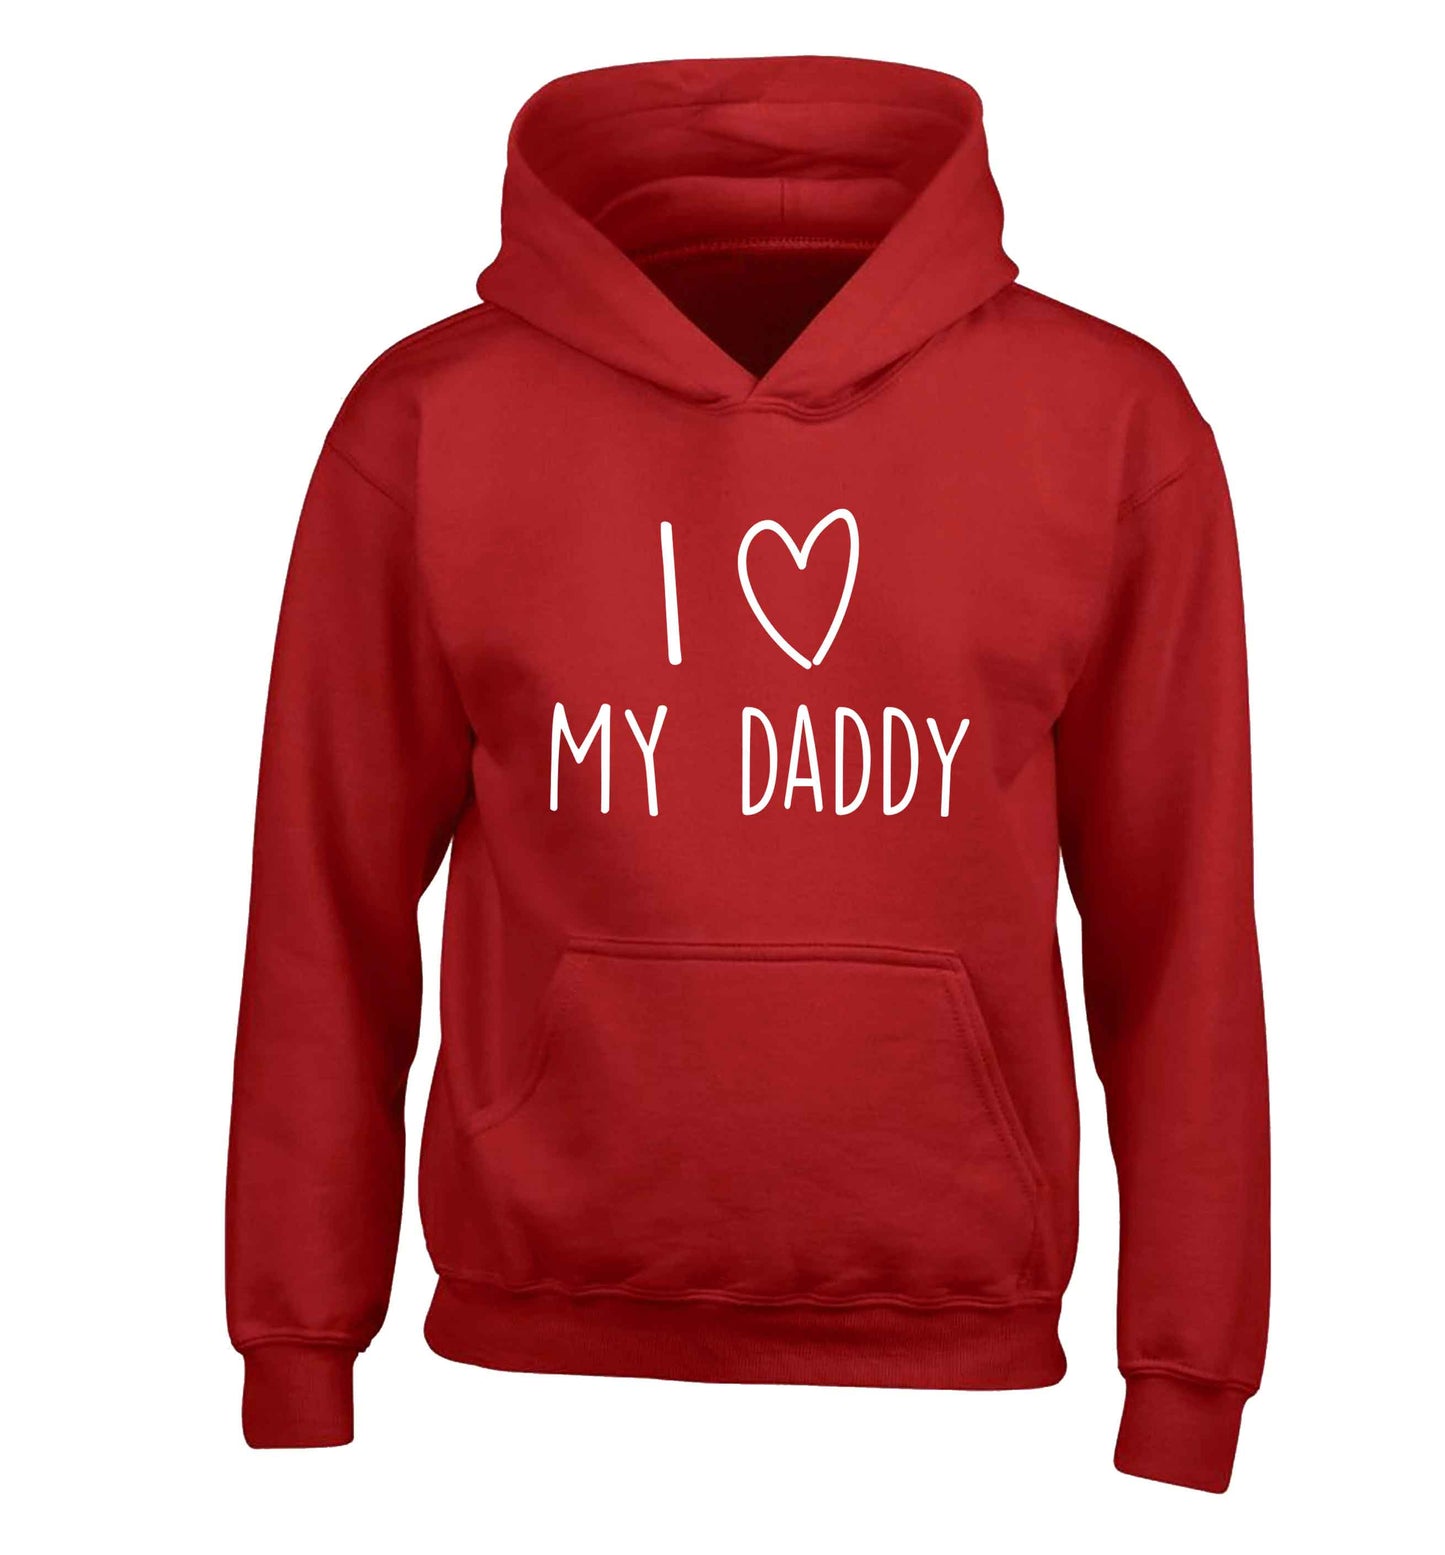 I love my daddy children's red hoodie 12-13 Years